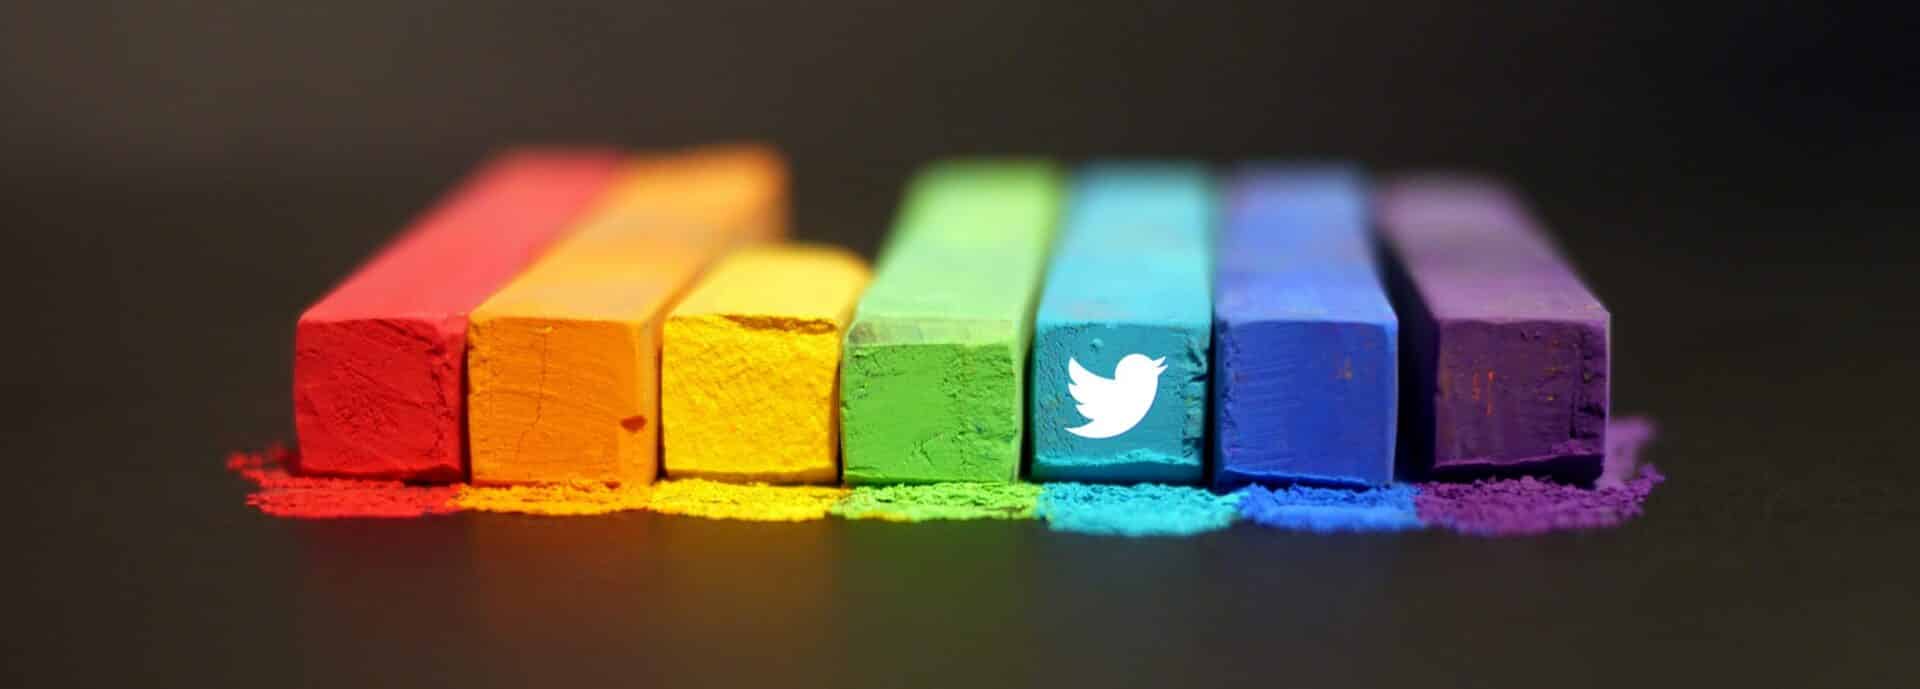 rectangular chalk prisms arranged in a rainbow color scheme with twitter's bird logo on one of them